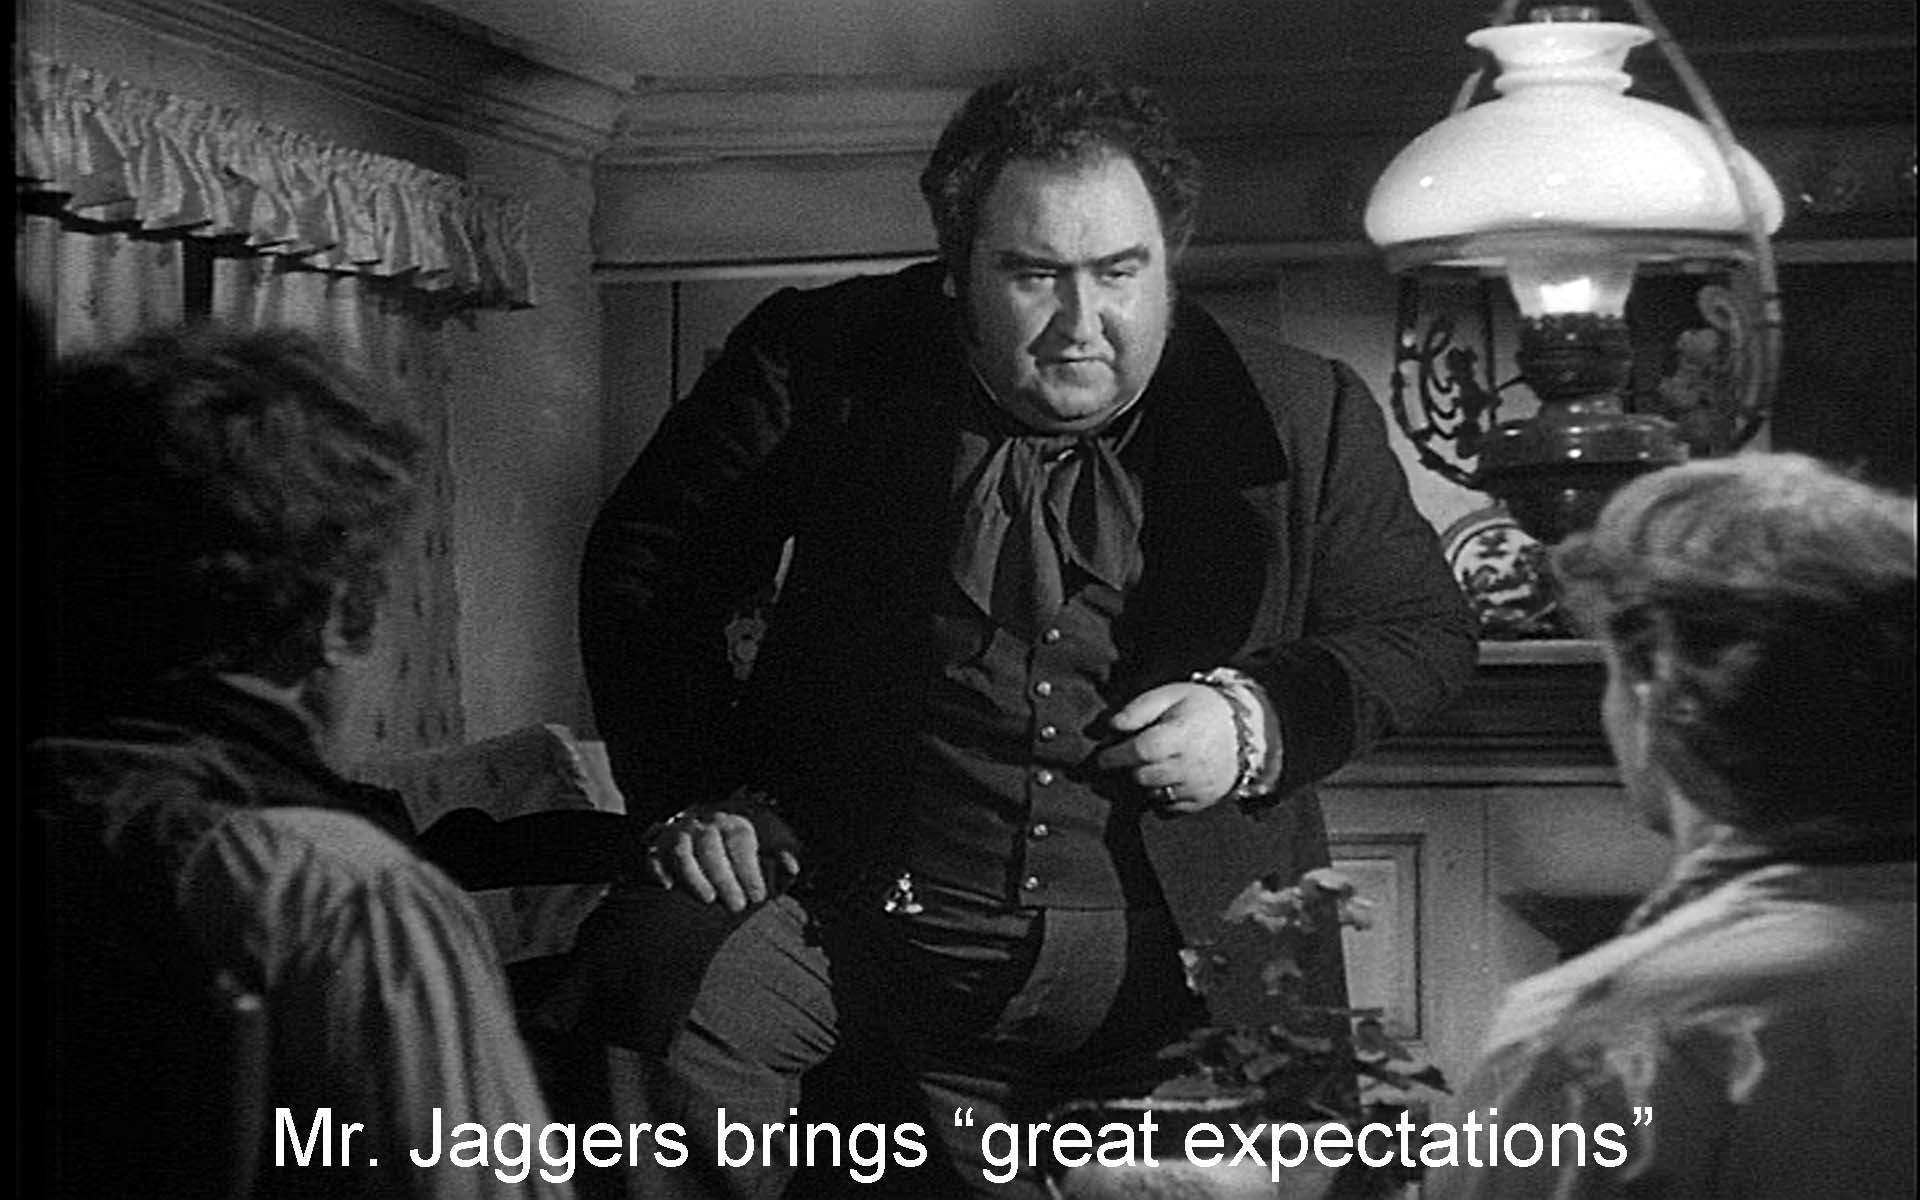 Mr. Jaggers brings great expectations